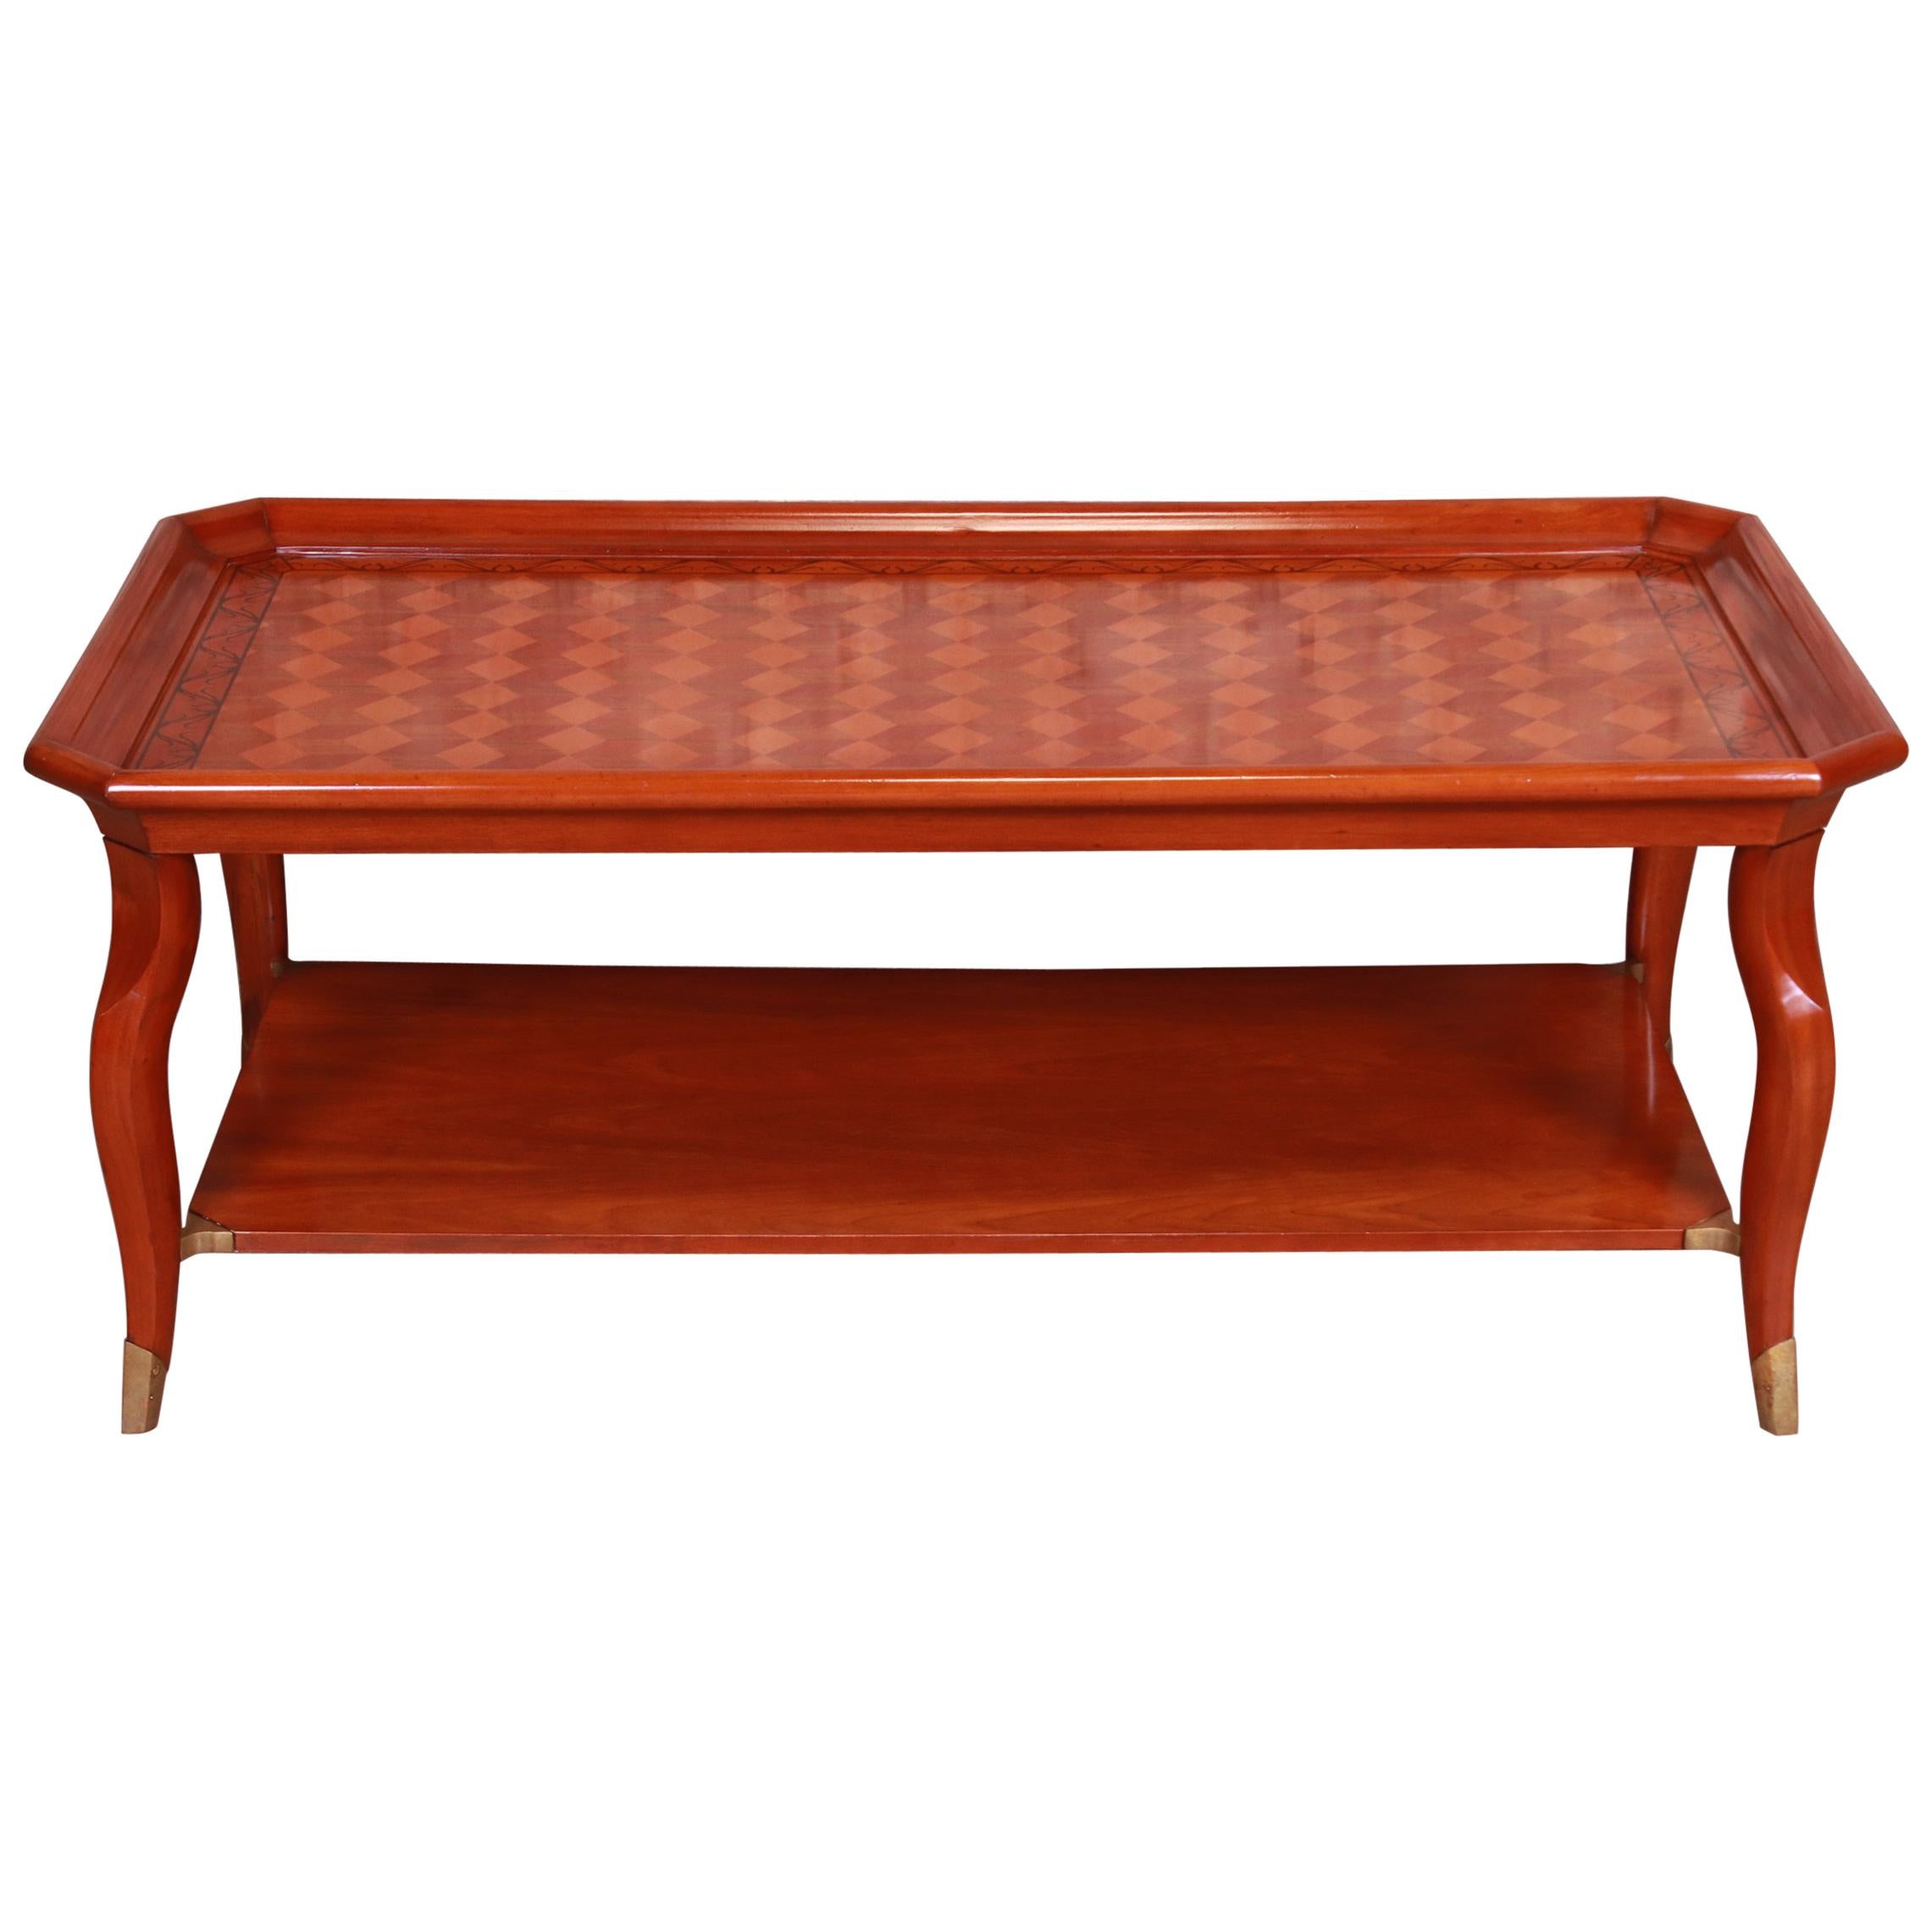 John Widdicomb Italian Provincial Parquetry Top Two-Tier Coffee Table For Sale